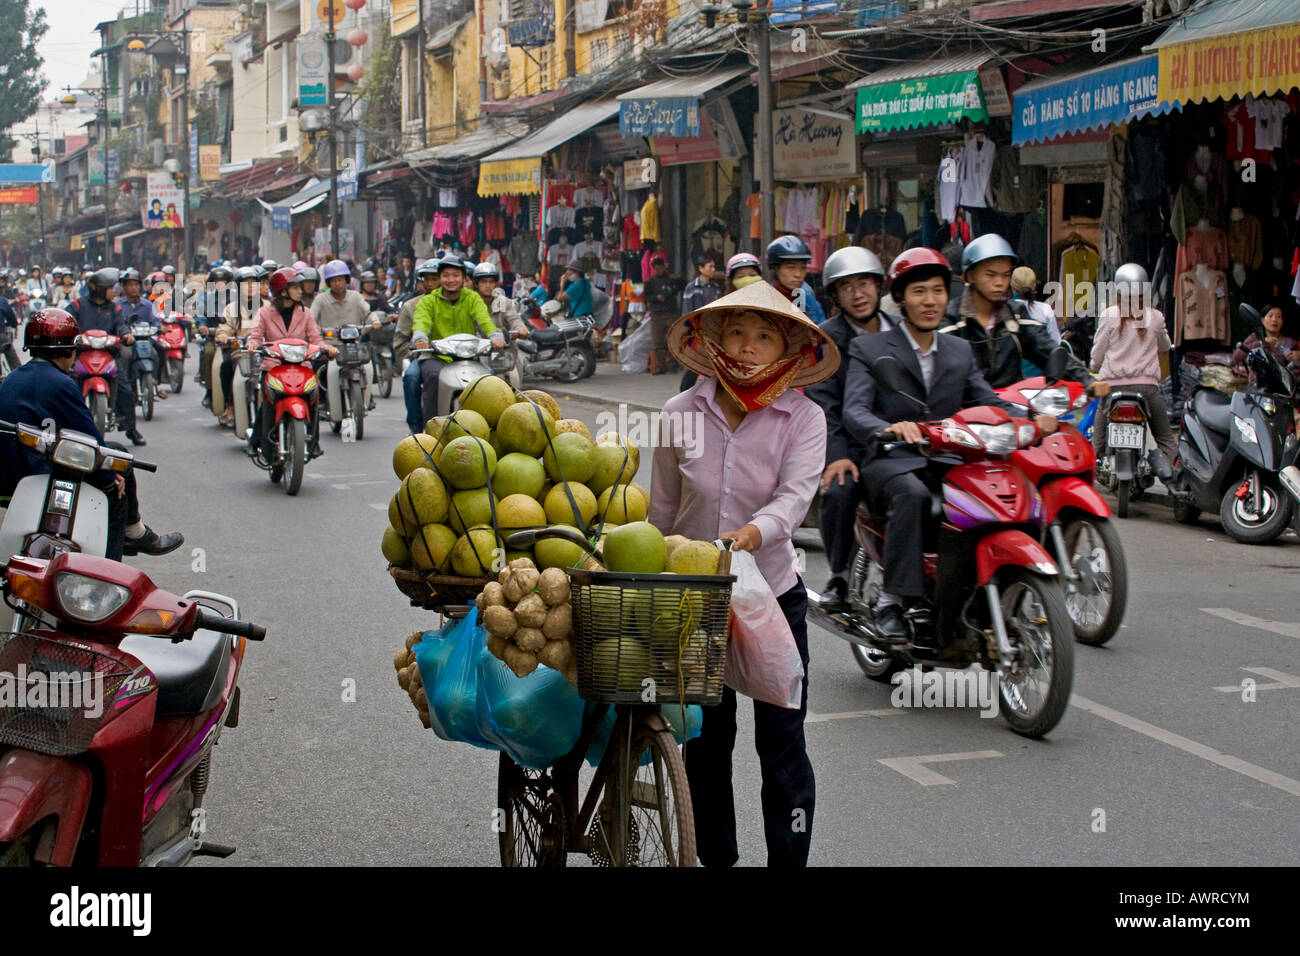 A mobile fruit and vegetable merchant and a crowd of motorcyclists on the busy streets of HANOI VIETNAM Stock Photo